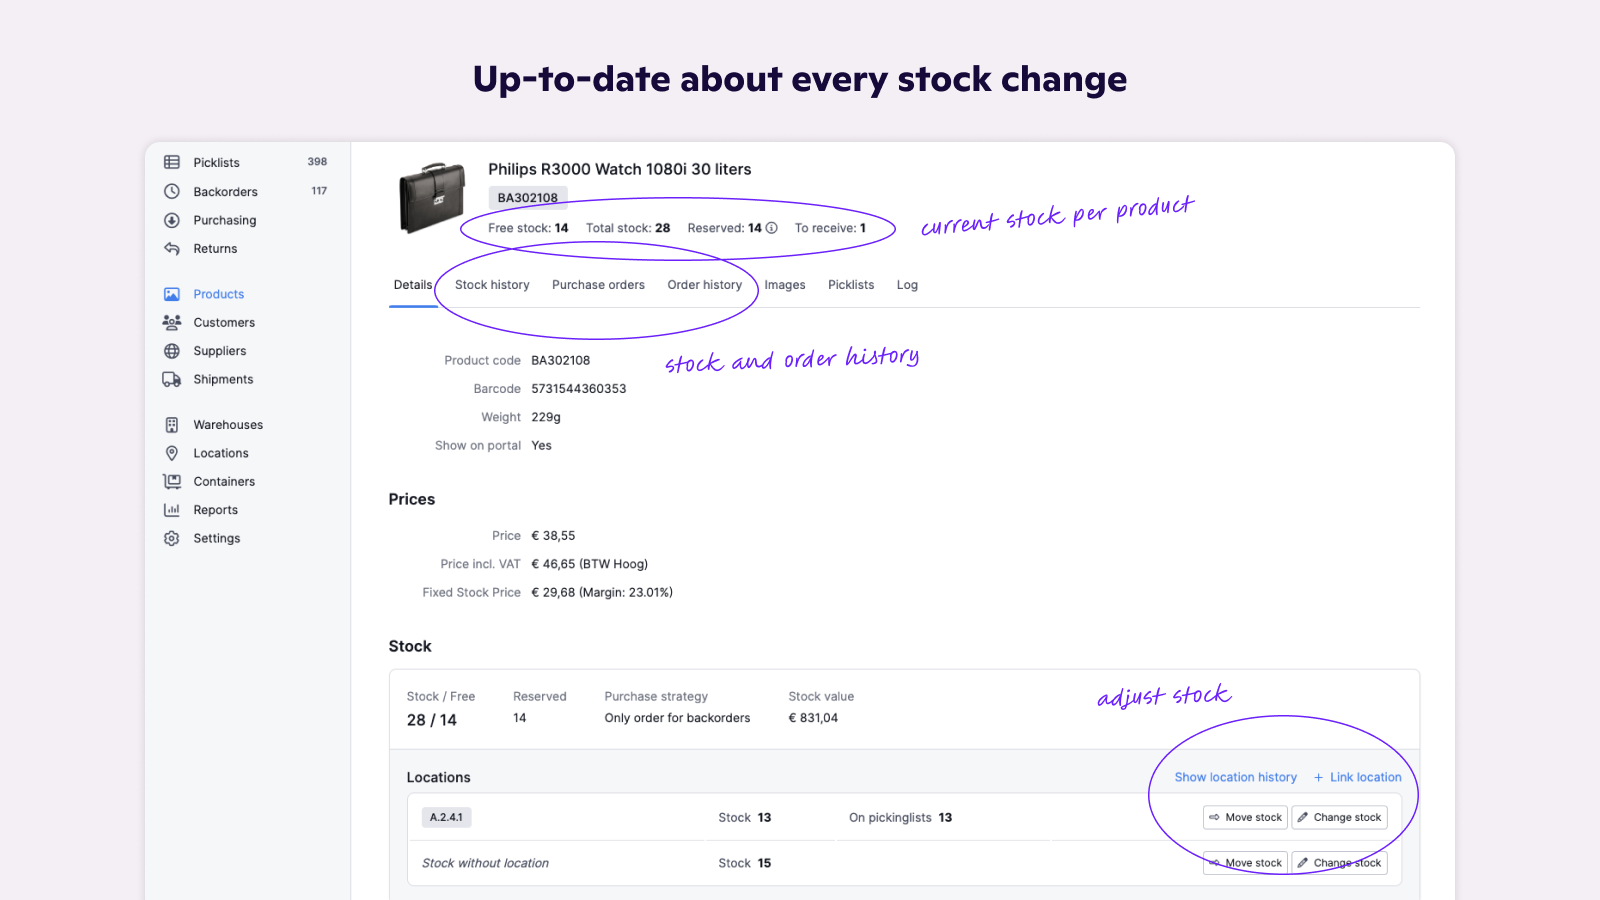 Up-to-date about every stock change